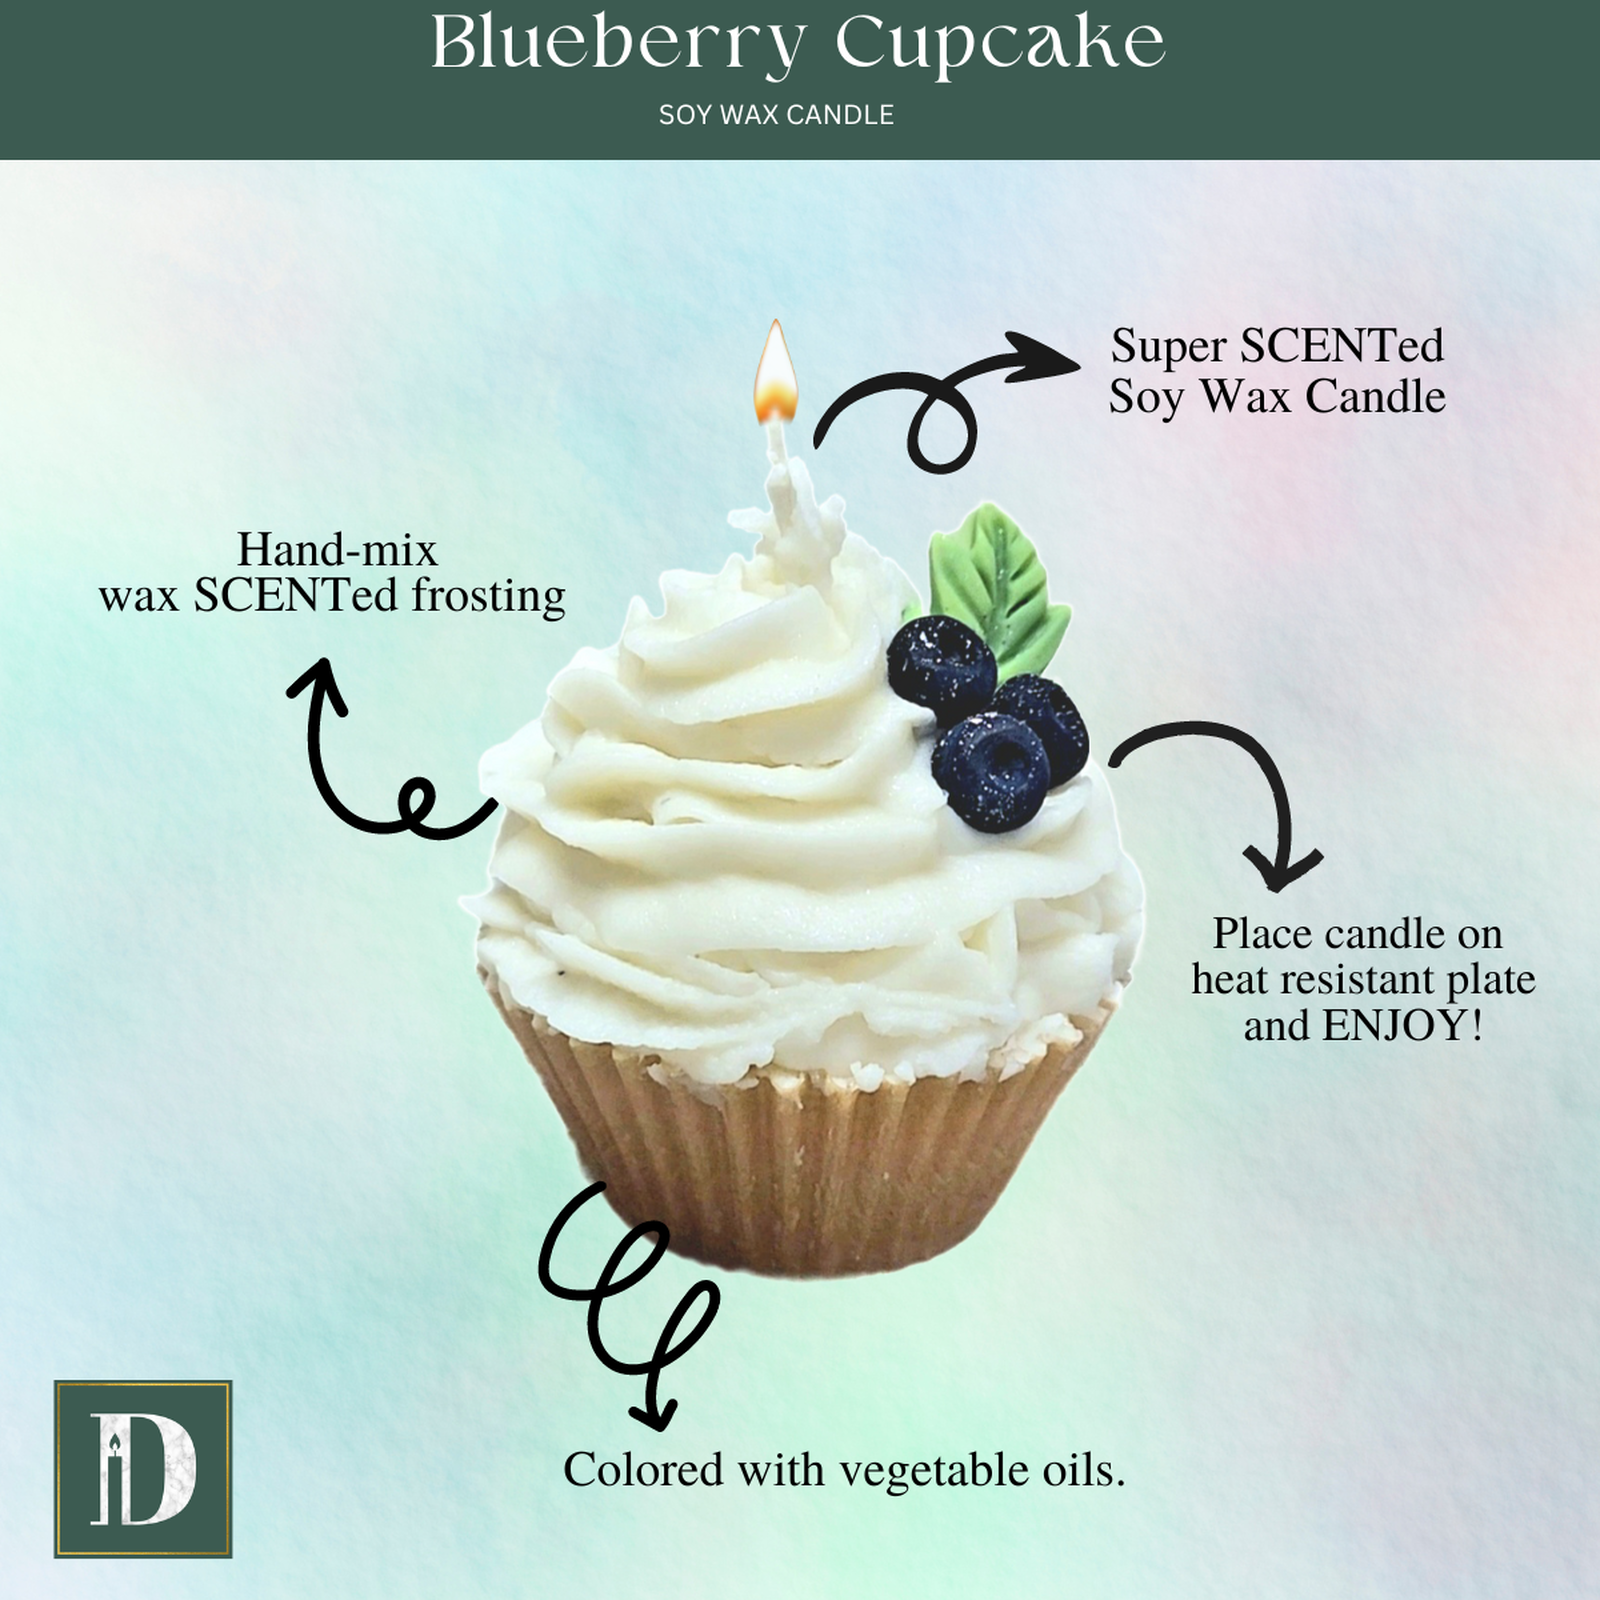 Blueberry Cupcake Soy Wax CANDLE - D SCENT 